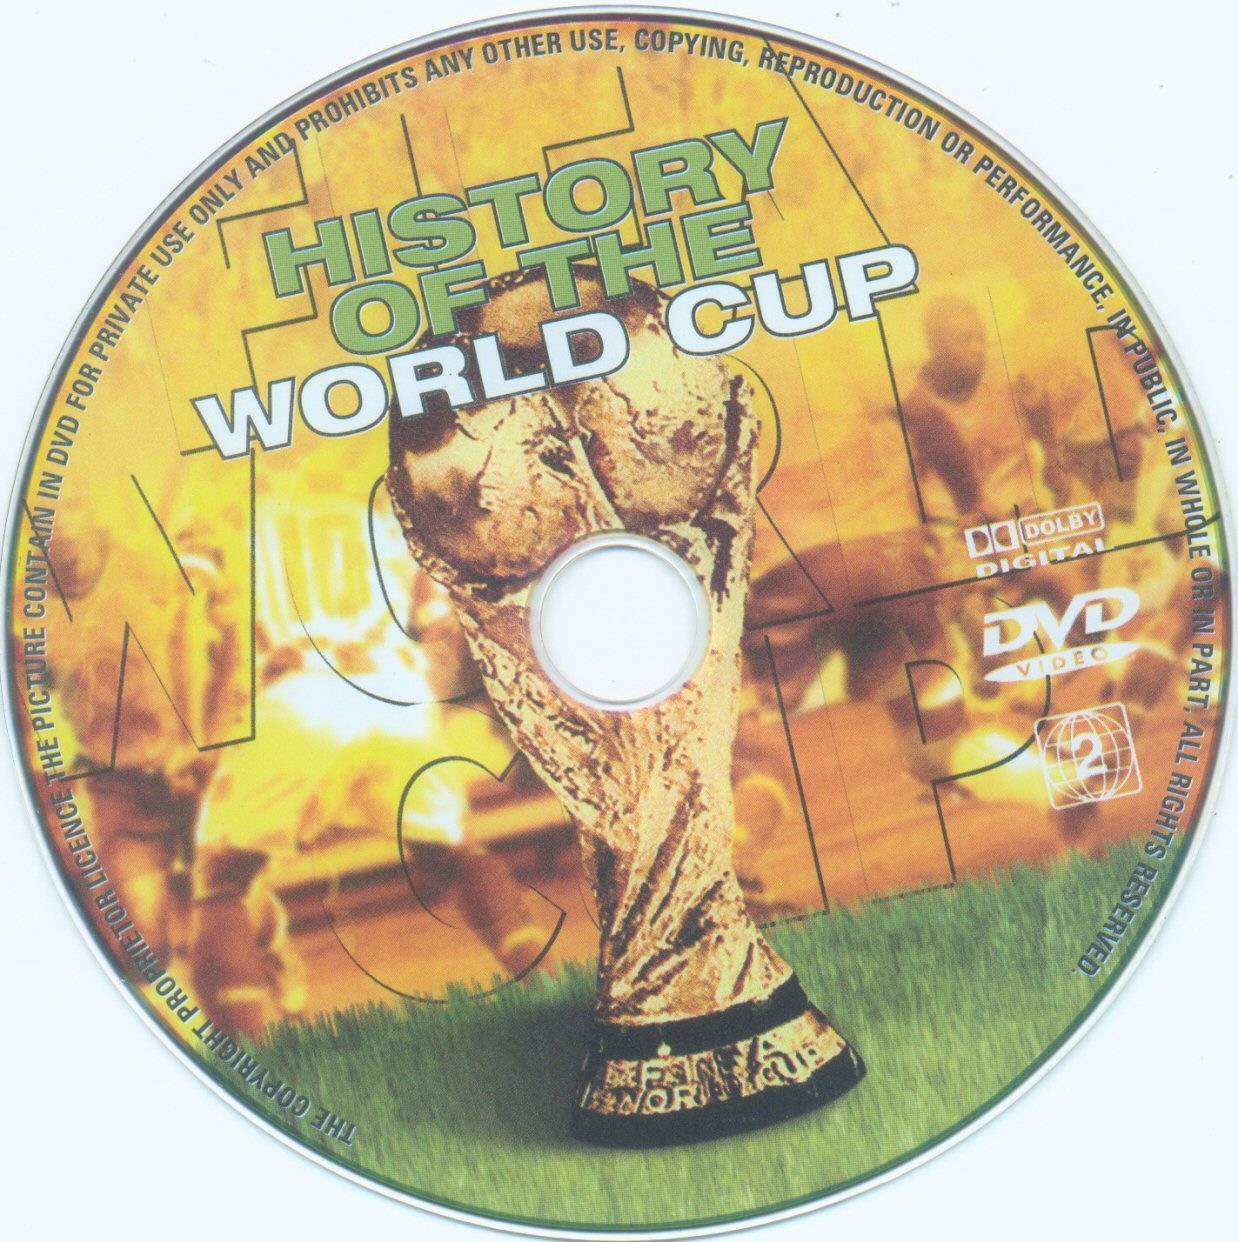 Click to view full size image -  DVD Cover - H - Histori of the World Cupl - Povjest Svjetskih Nogometnih Prvenstava DVD - Histori of the World Cupl - Povjest Svjetskih Nogometnih Prvenstava DVD.jpg